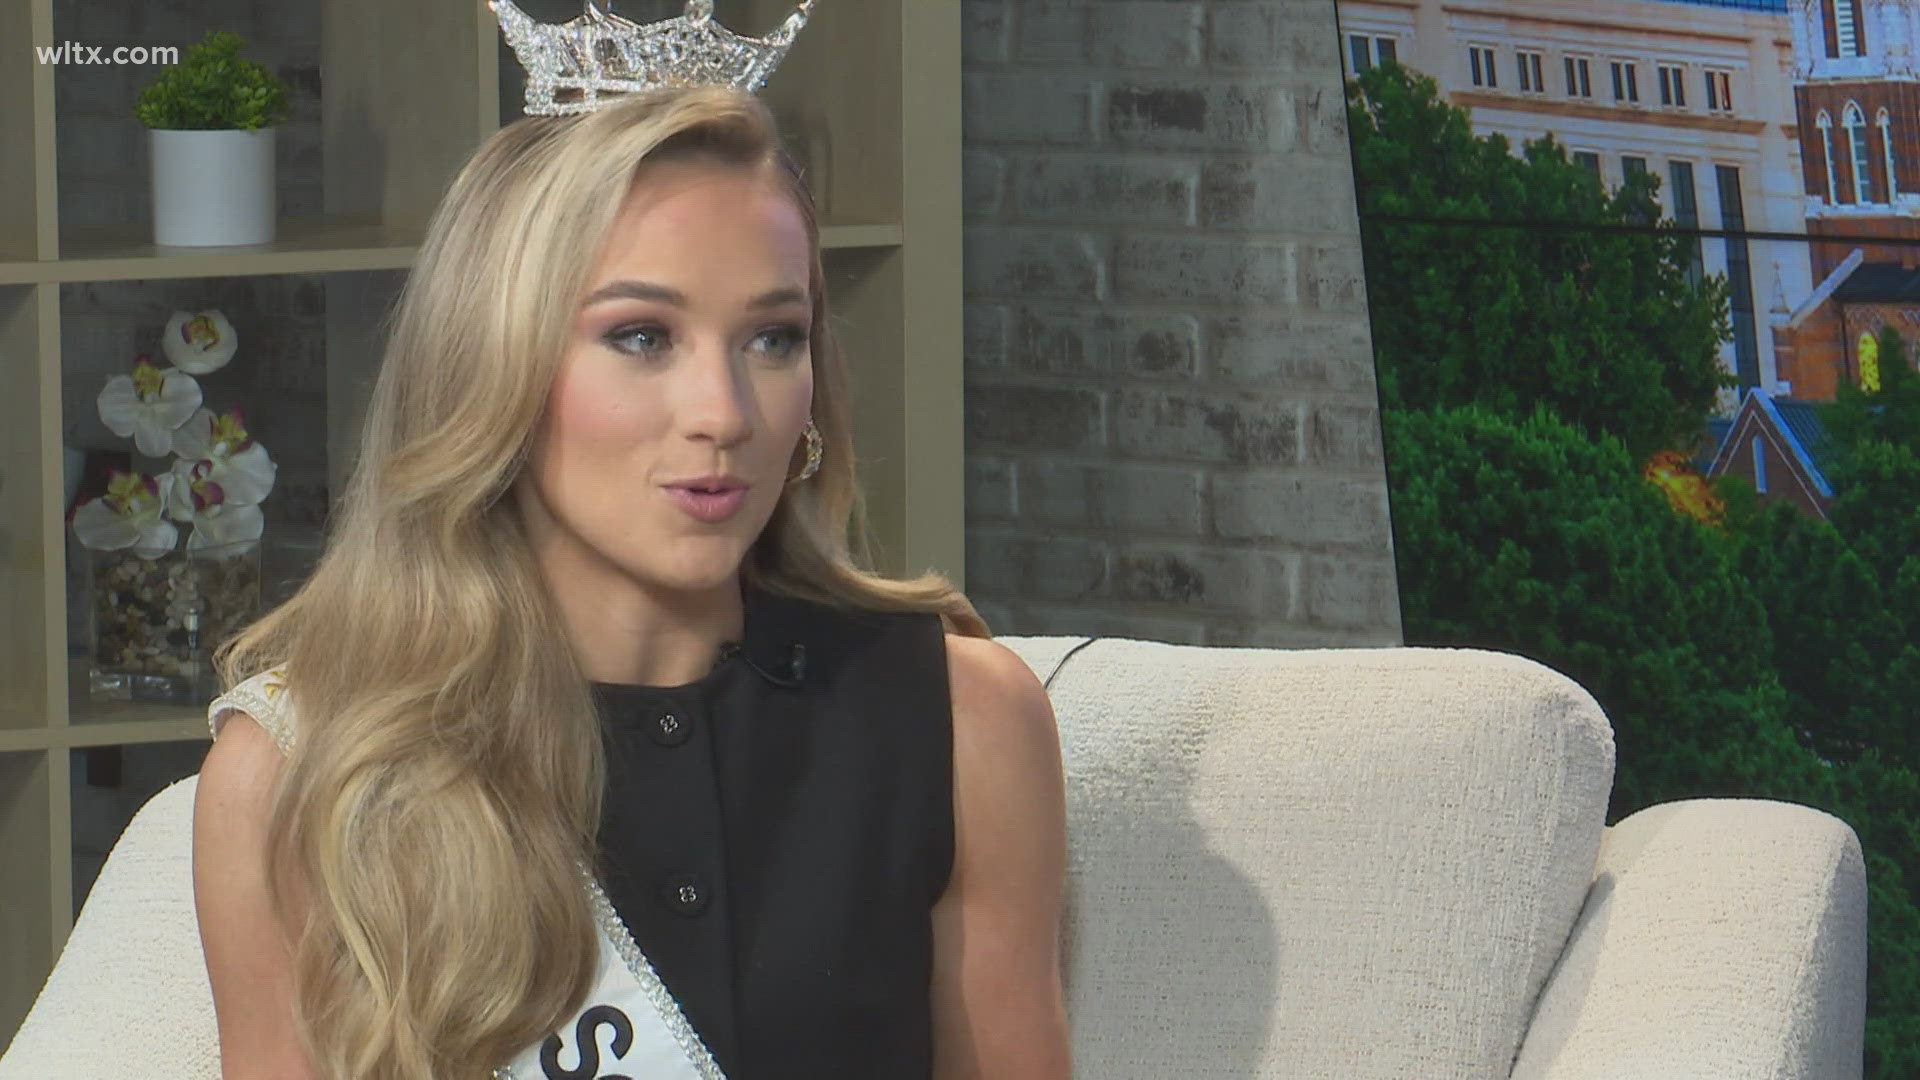 Davis Wash is the new Miss SC, originally from Edgefield she now represents all of the state.